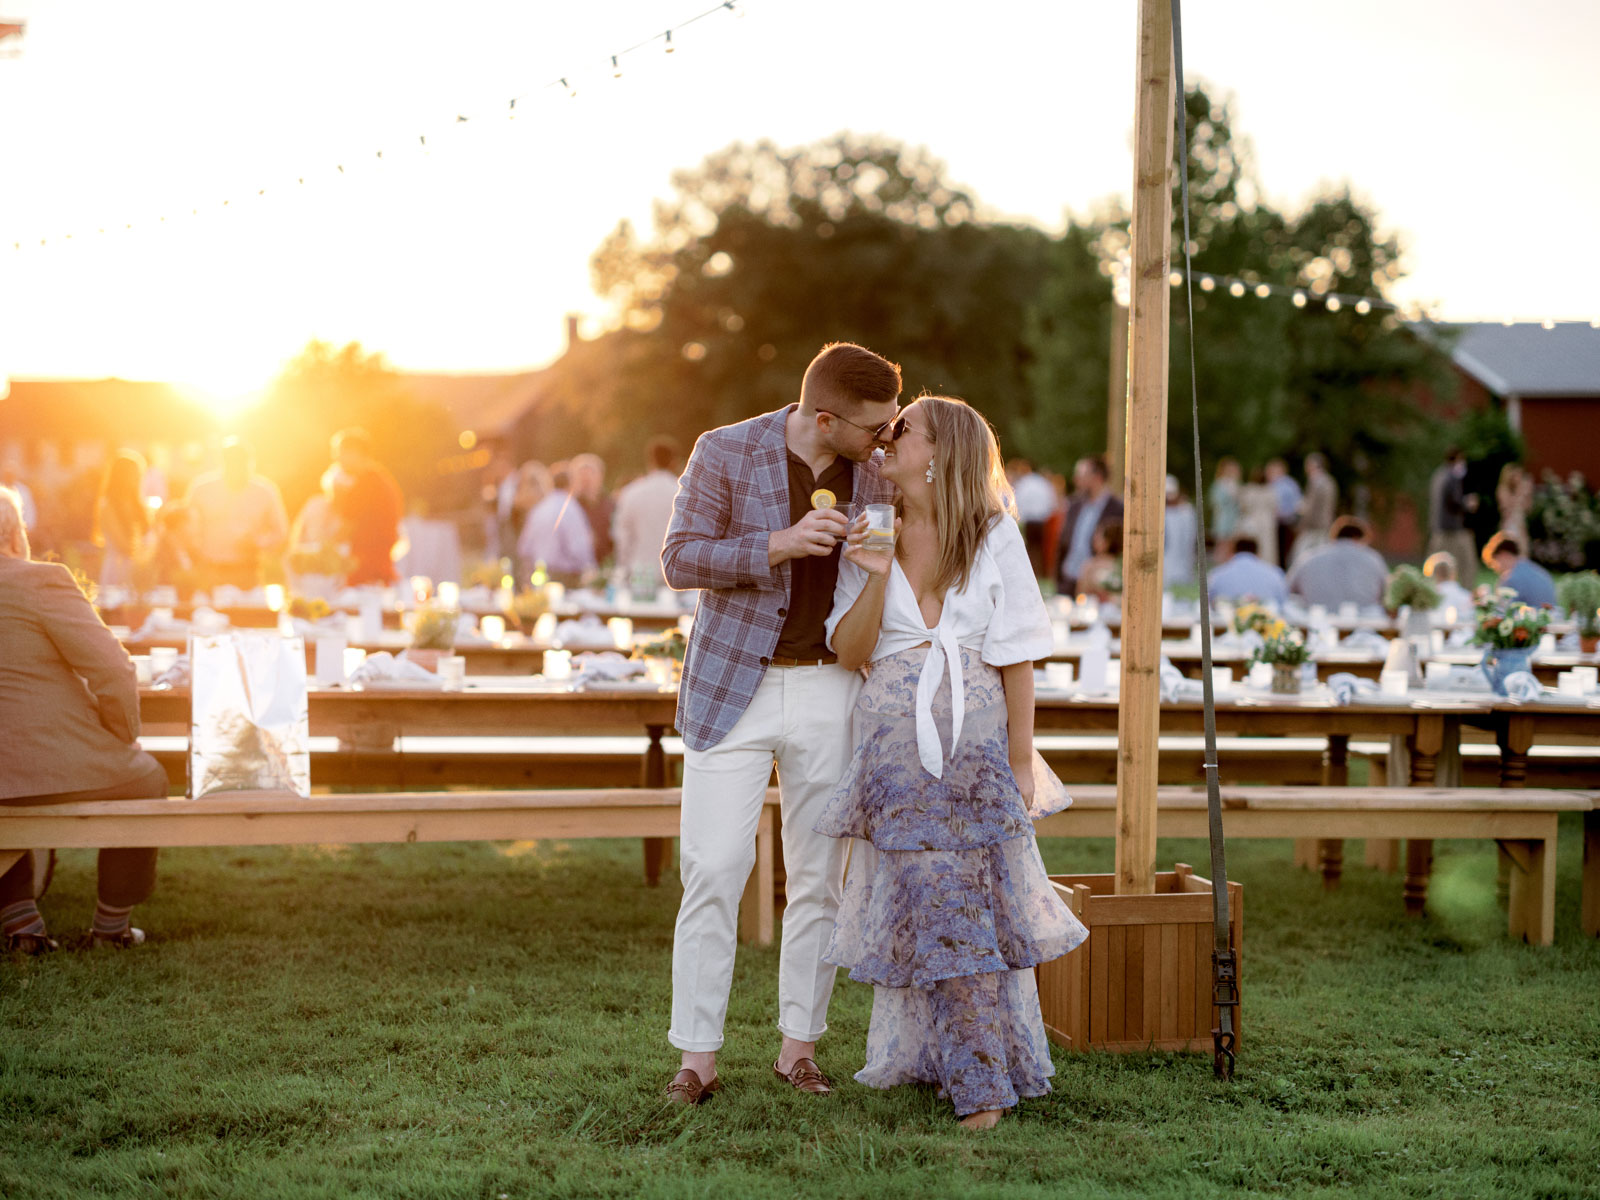 The couple is about to kiss each other. In the background are guests mingling with each other in the rehearsal dinner. Editorial image by Jenny Fu Studio